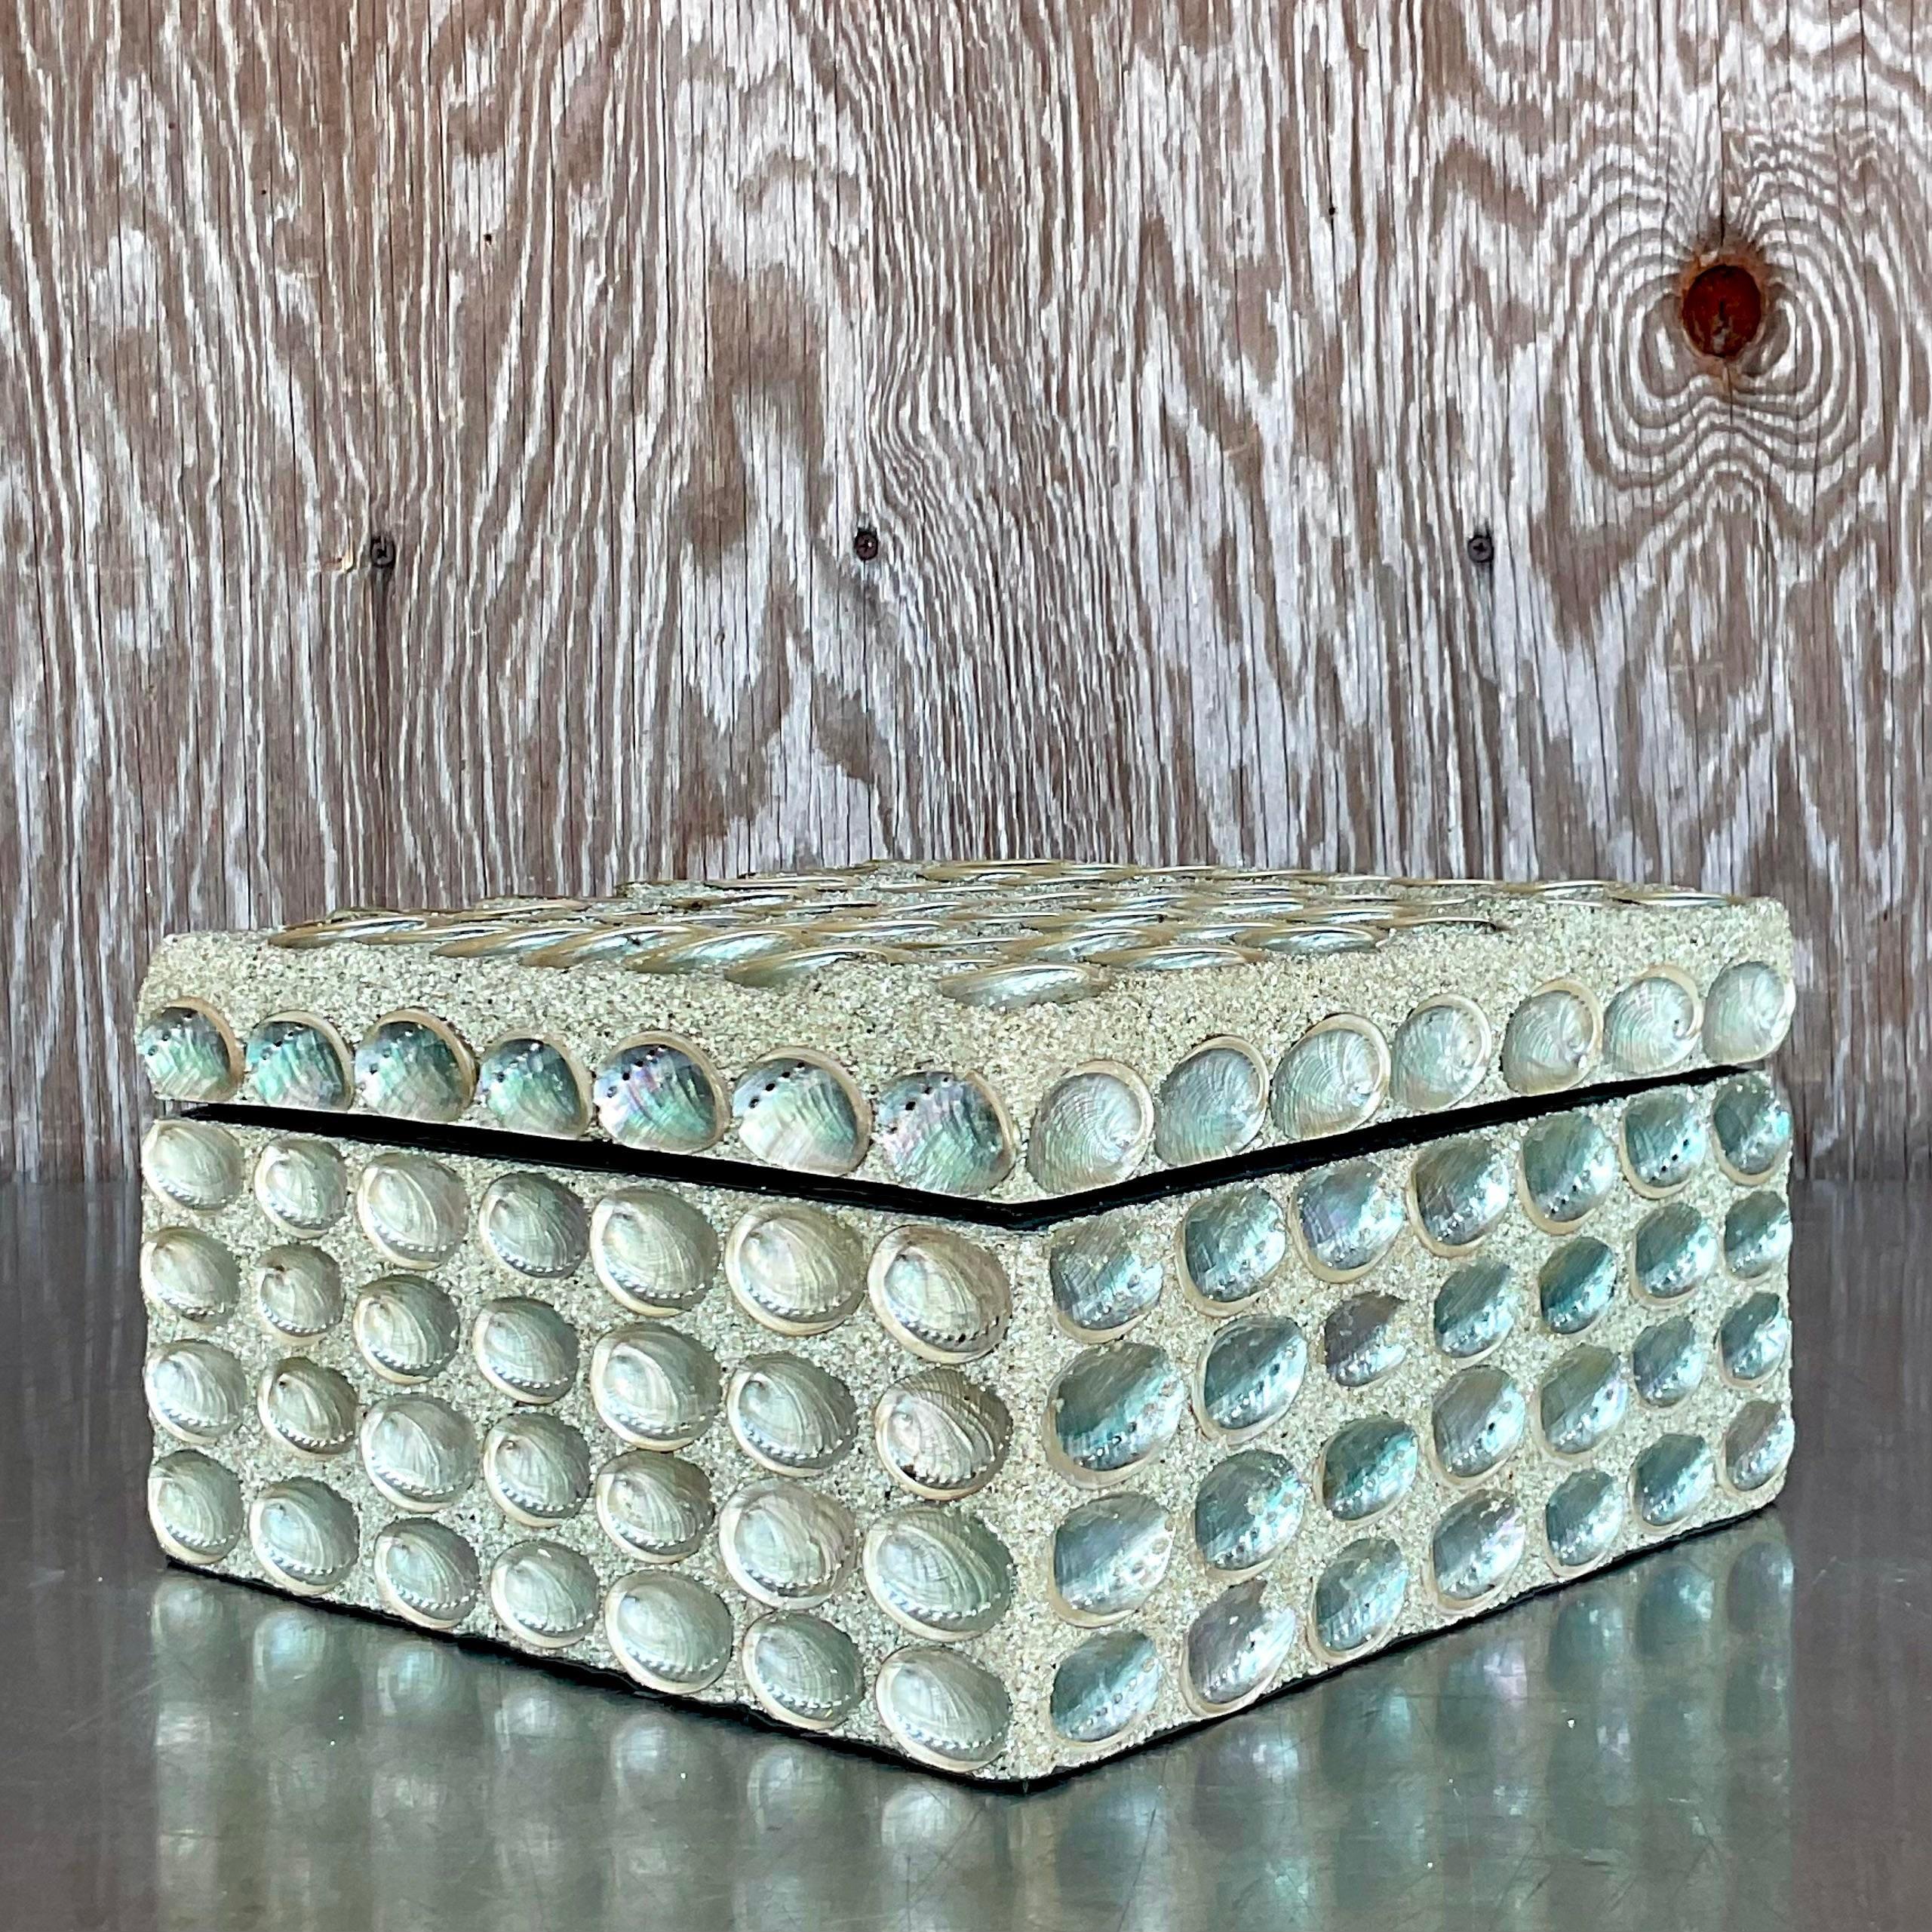 A gorgeous vintage silver decoration box with shells encrusted on the exterior. It is a great and useful addition to a coastal aesthetic living space. Acquired at a Palm Beach estate.